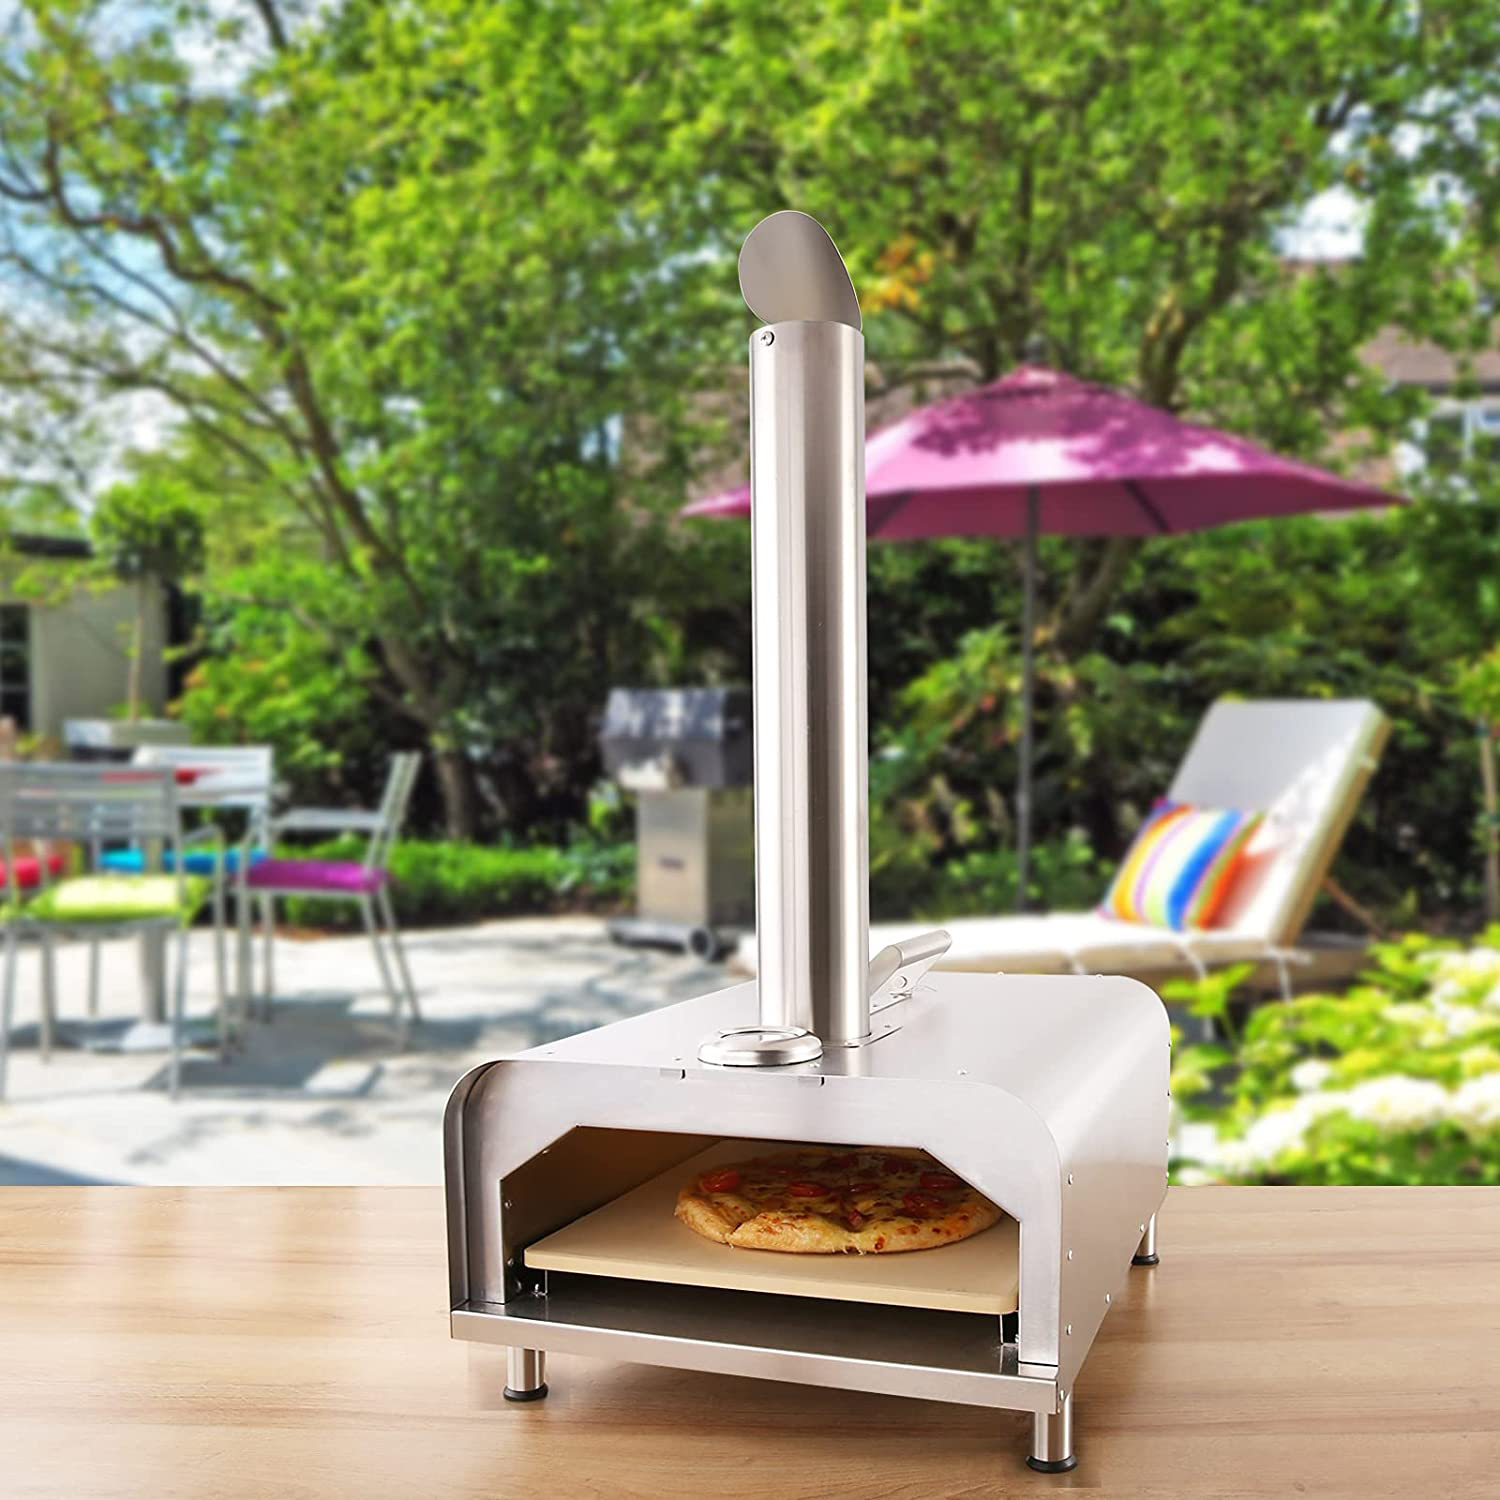 Gyber Fremont Wood Fired Pizza Oven (Outdoor) Natural Or Flavored Pellet Fuel, Cooks Meat - image 2 of 6